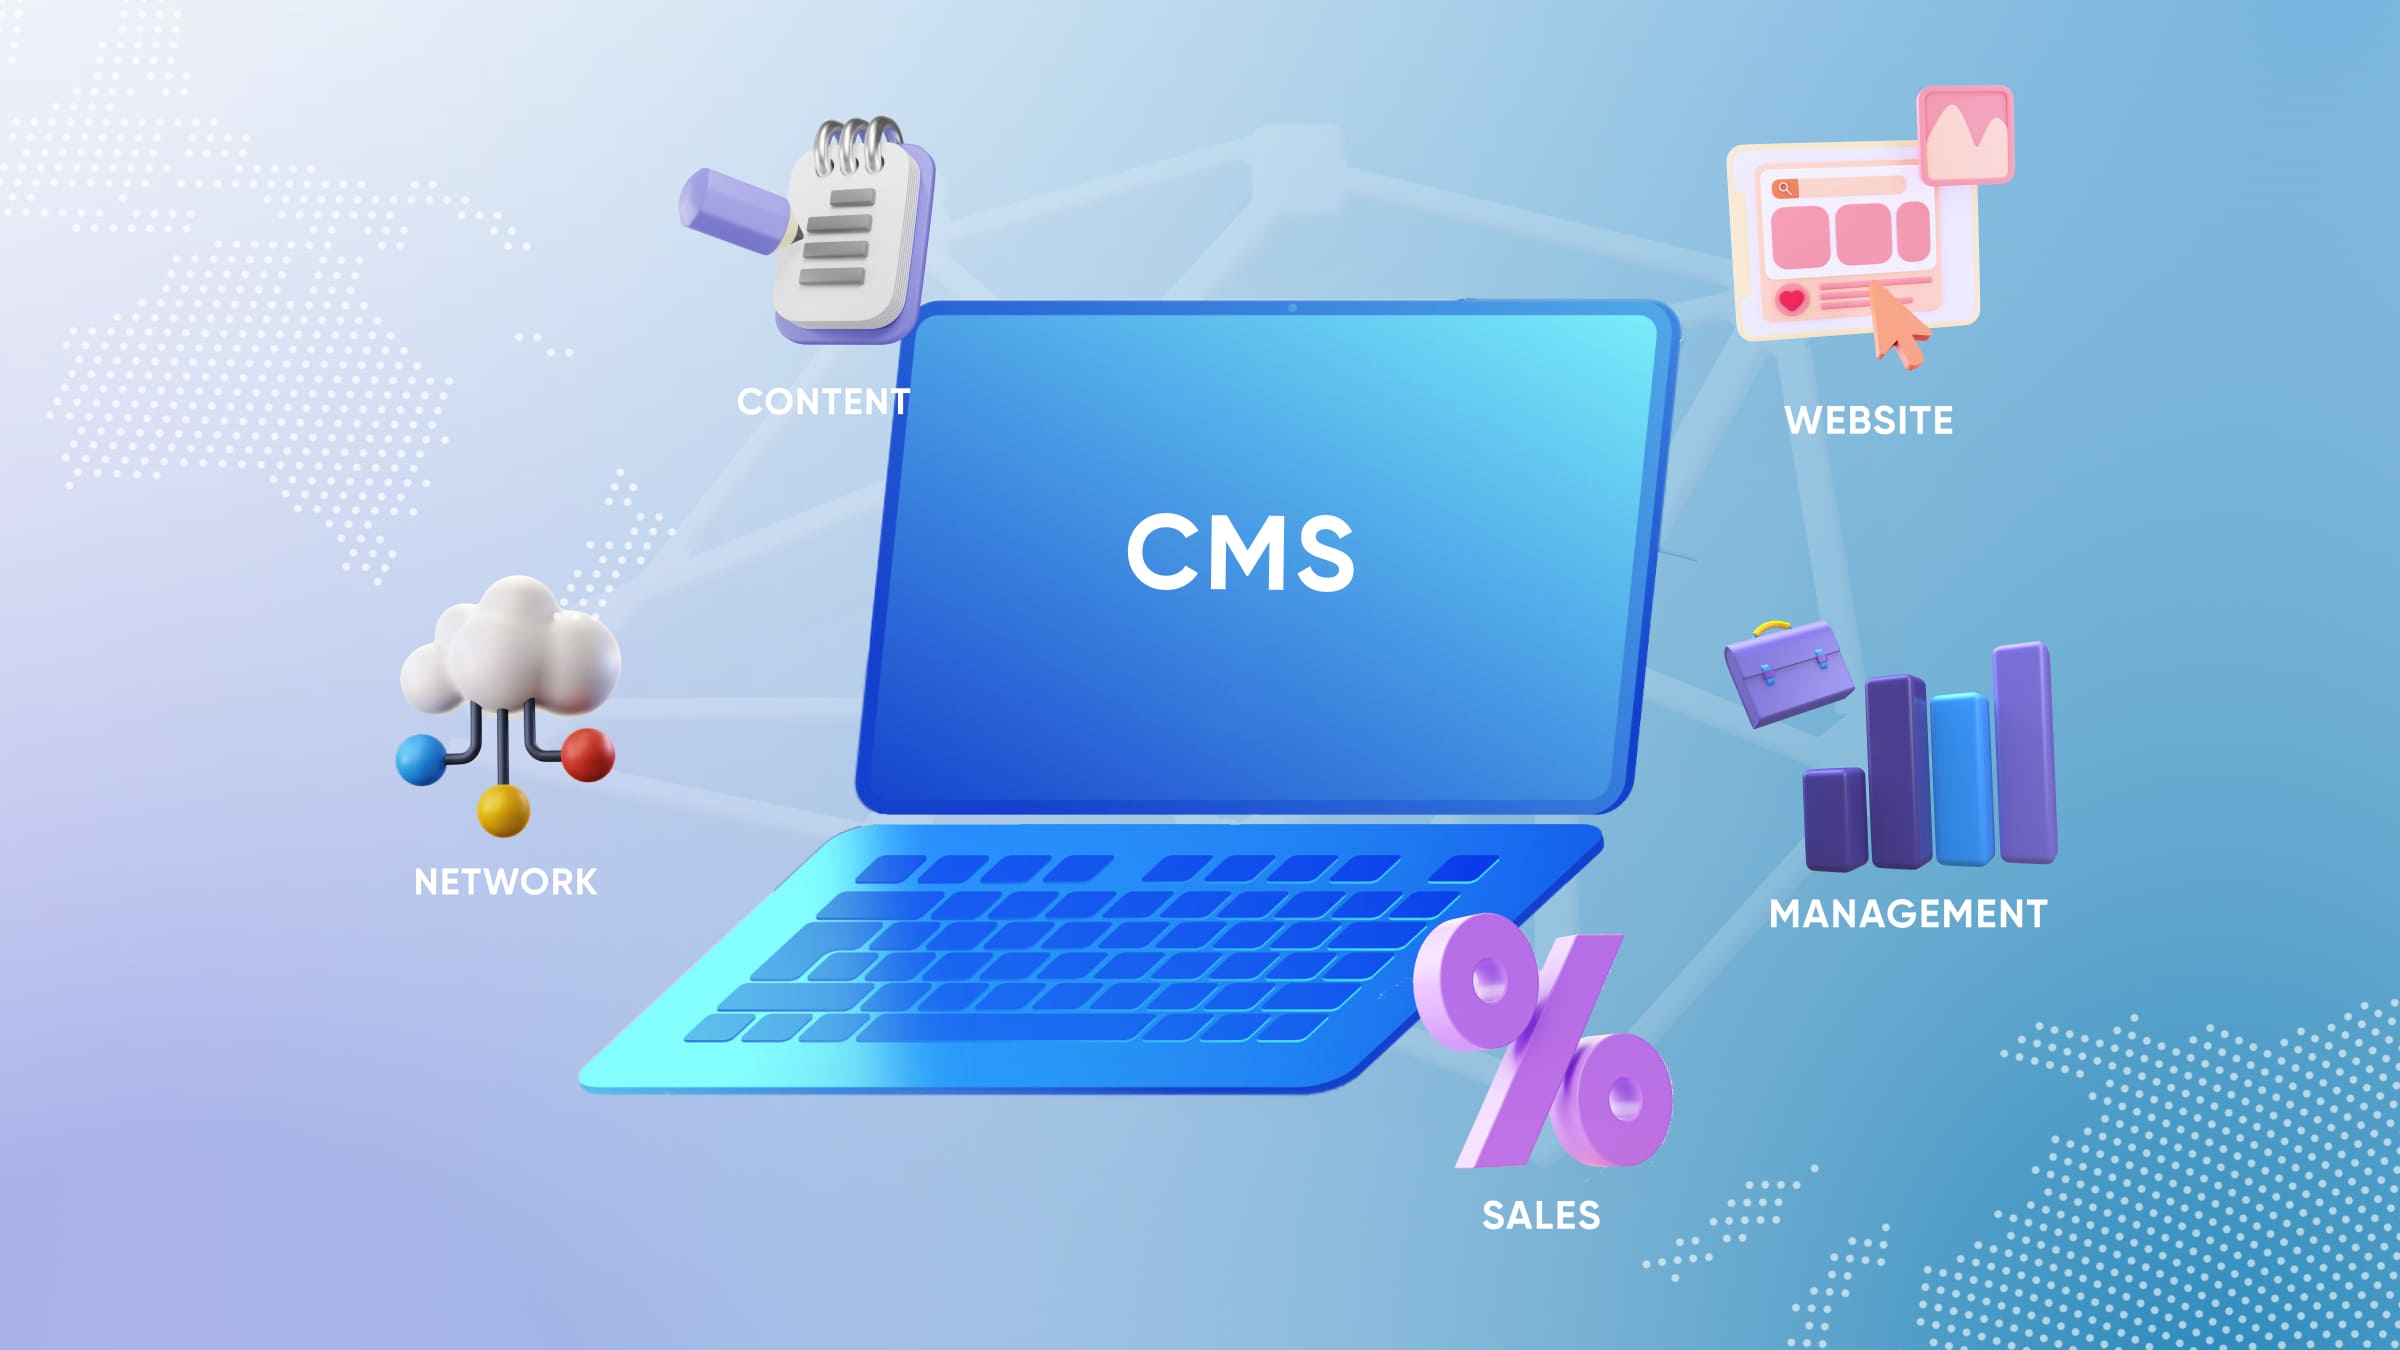 In this article, we tell you what CMS platforms are and what features they provide to users.